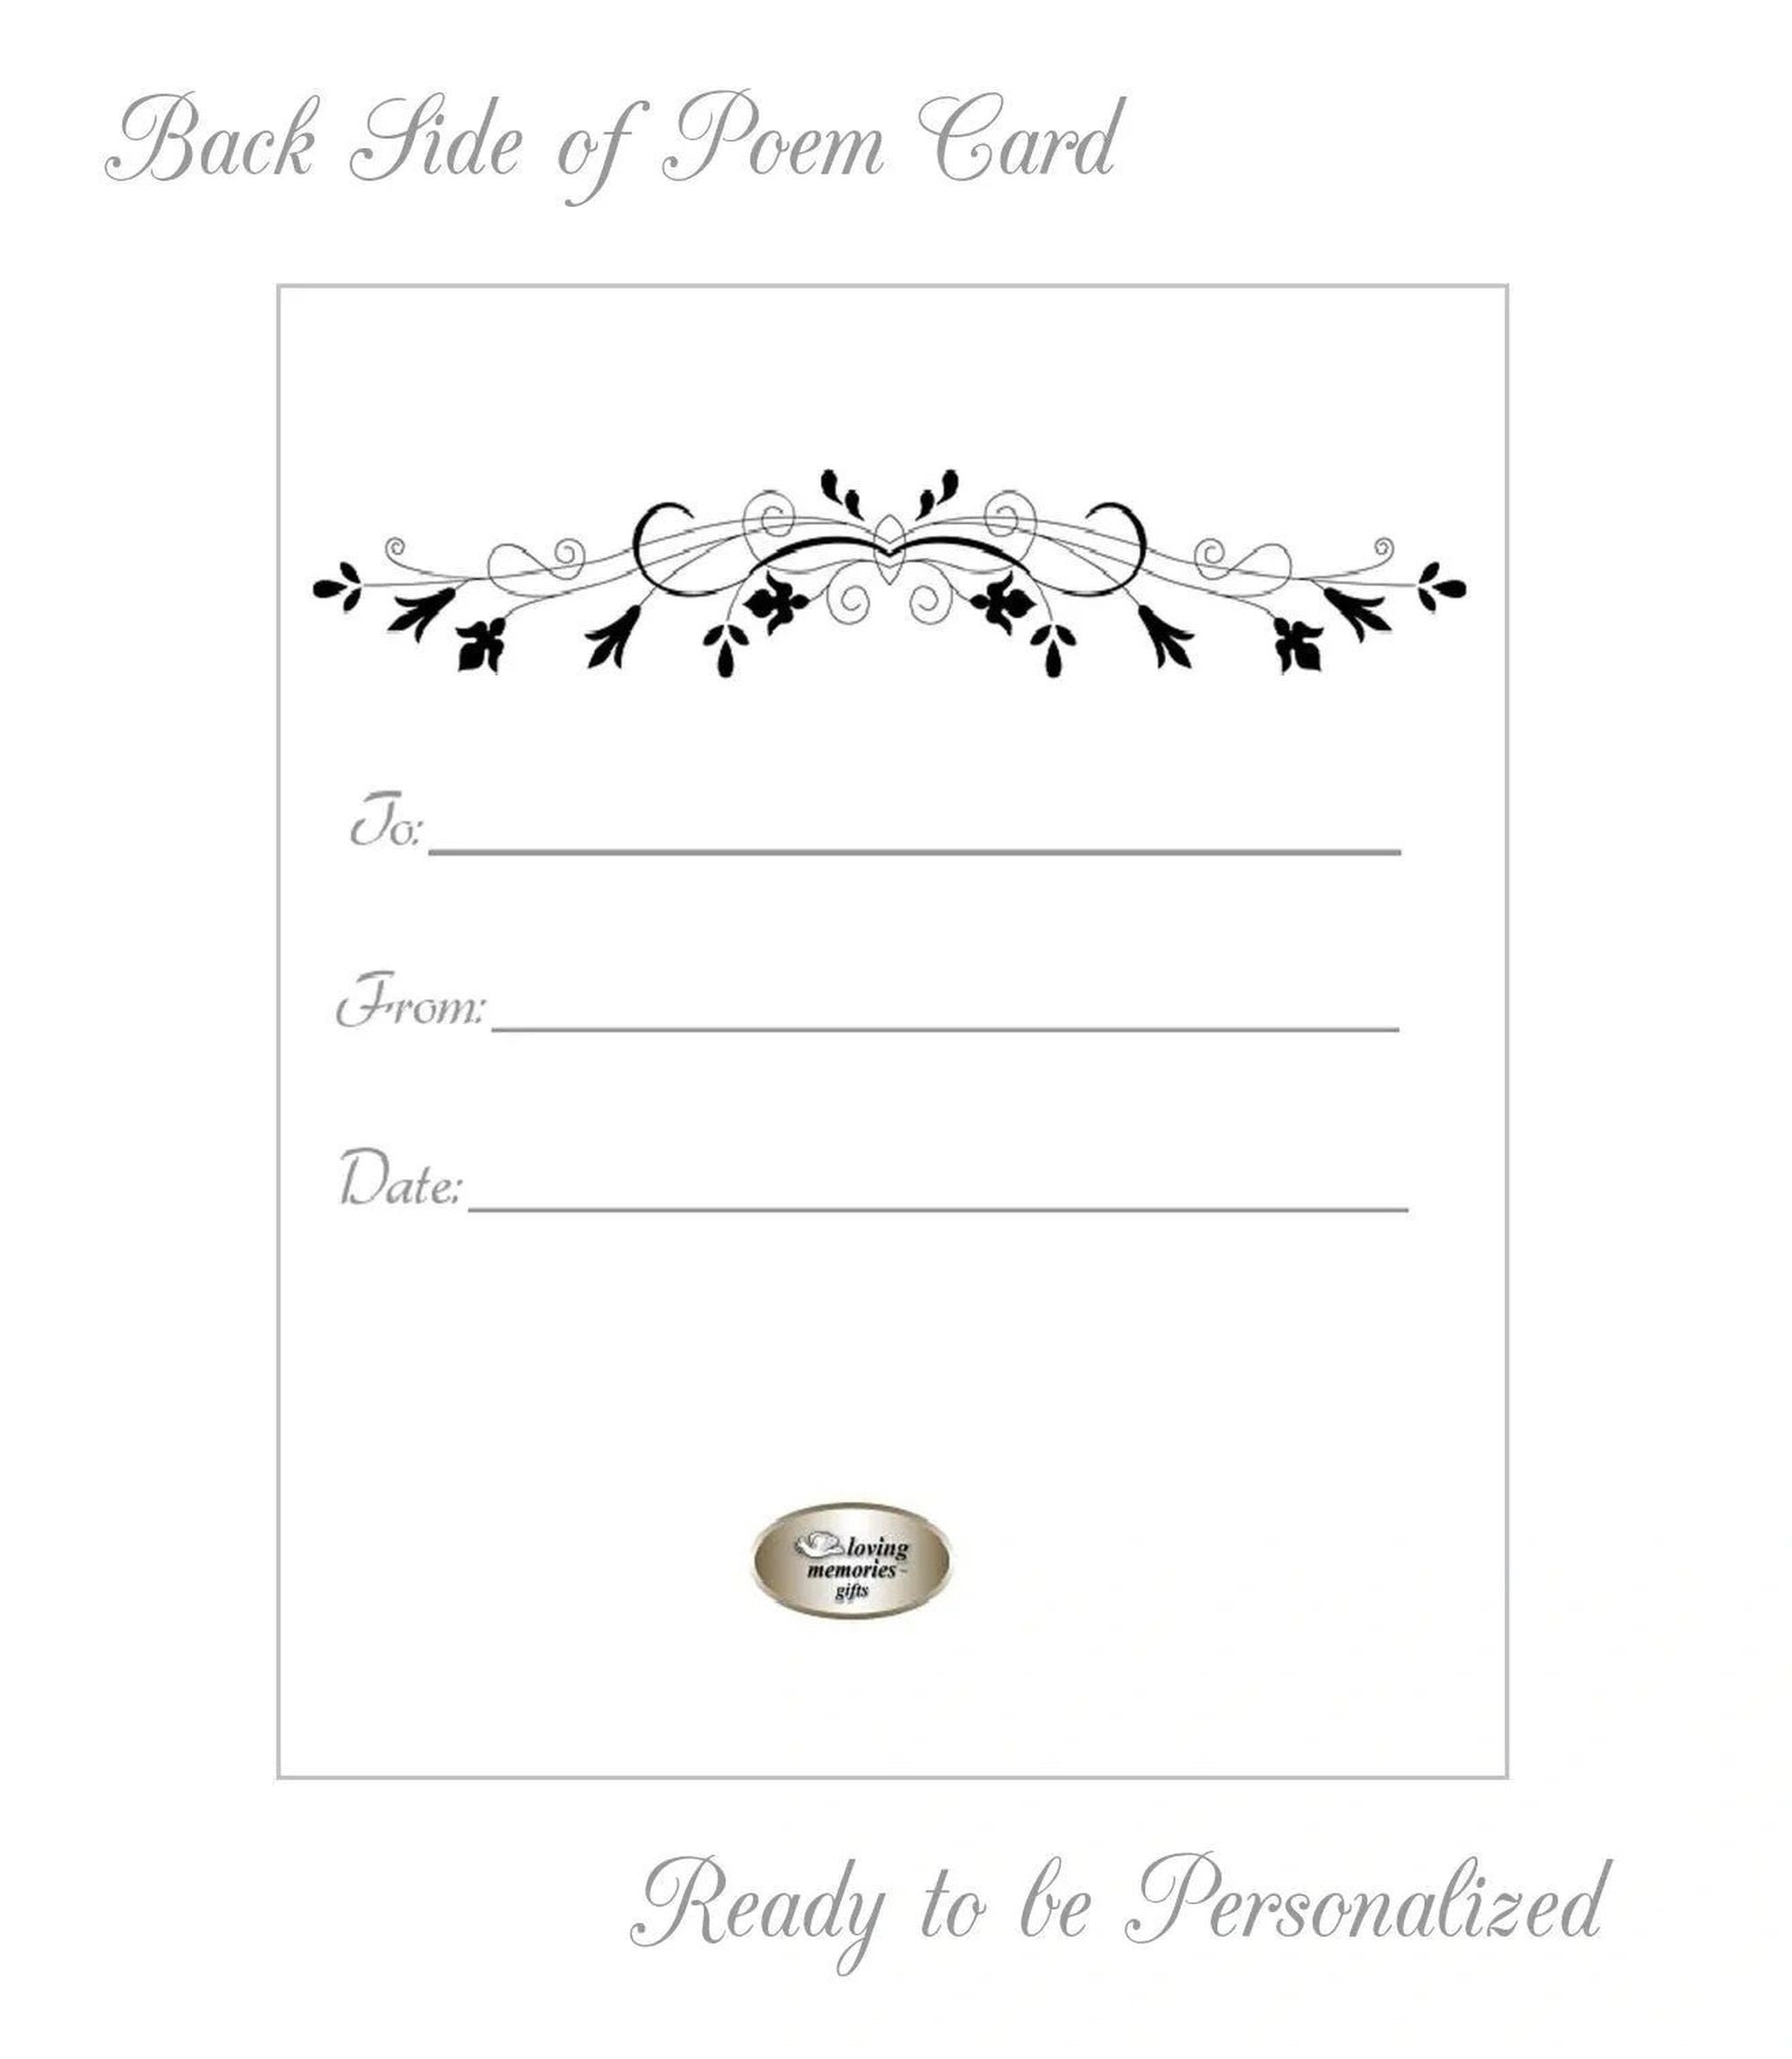 10 First Communion Gift Card Messages to Celebrate Her Faith – Little Girl's  Pearls